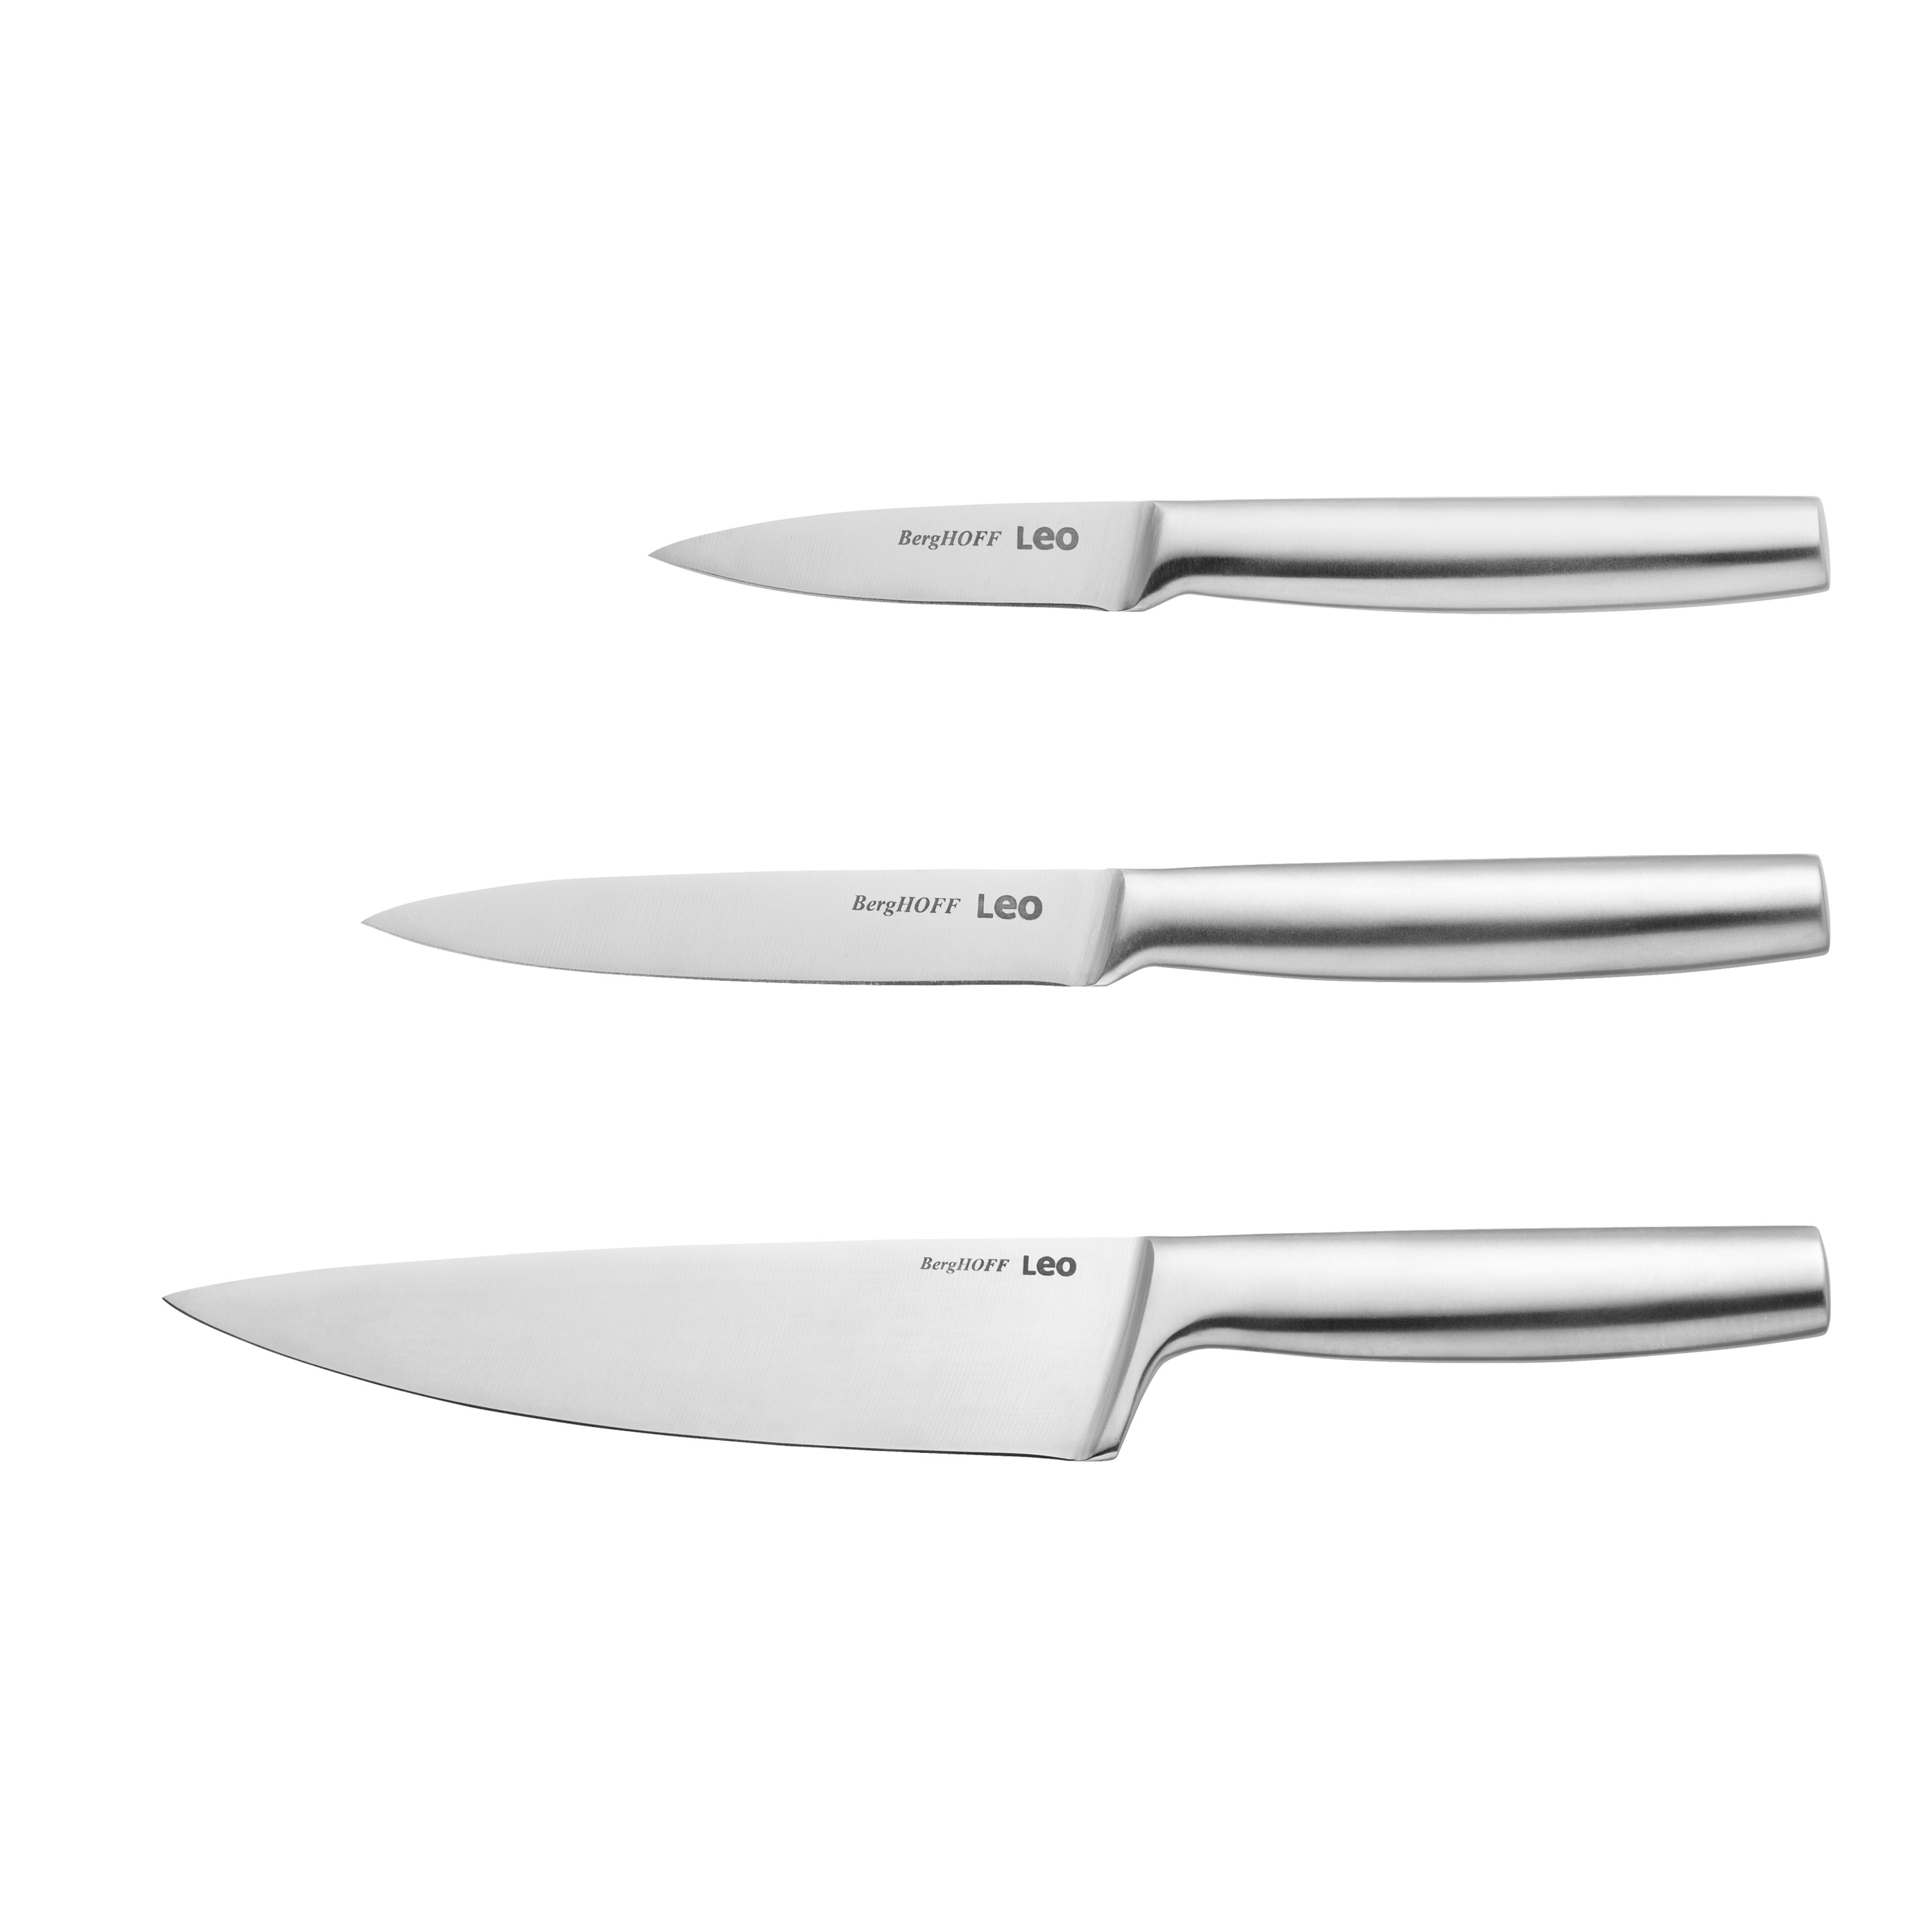 https://ak1.ostkcdn.com/images/products/is/images/direct/853d70defa458ba0f2a0f5abc255c0ebf5df2e87/BergHOFF-Legacy-Stainless-Steel-3Pc-Starter-Knife-Set.jpg